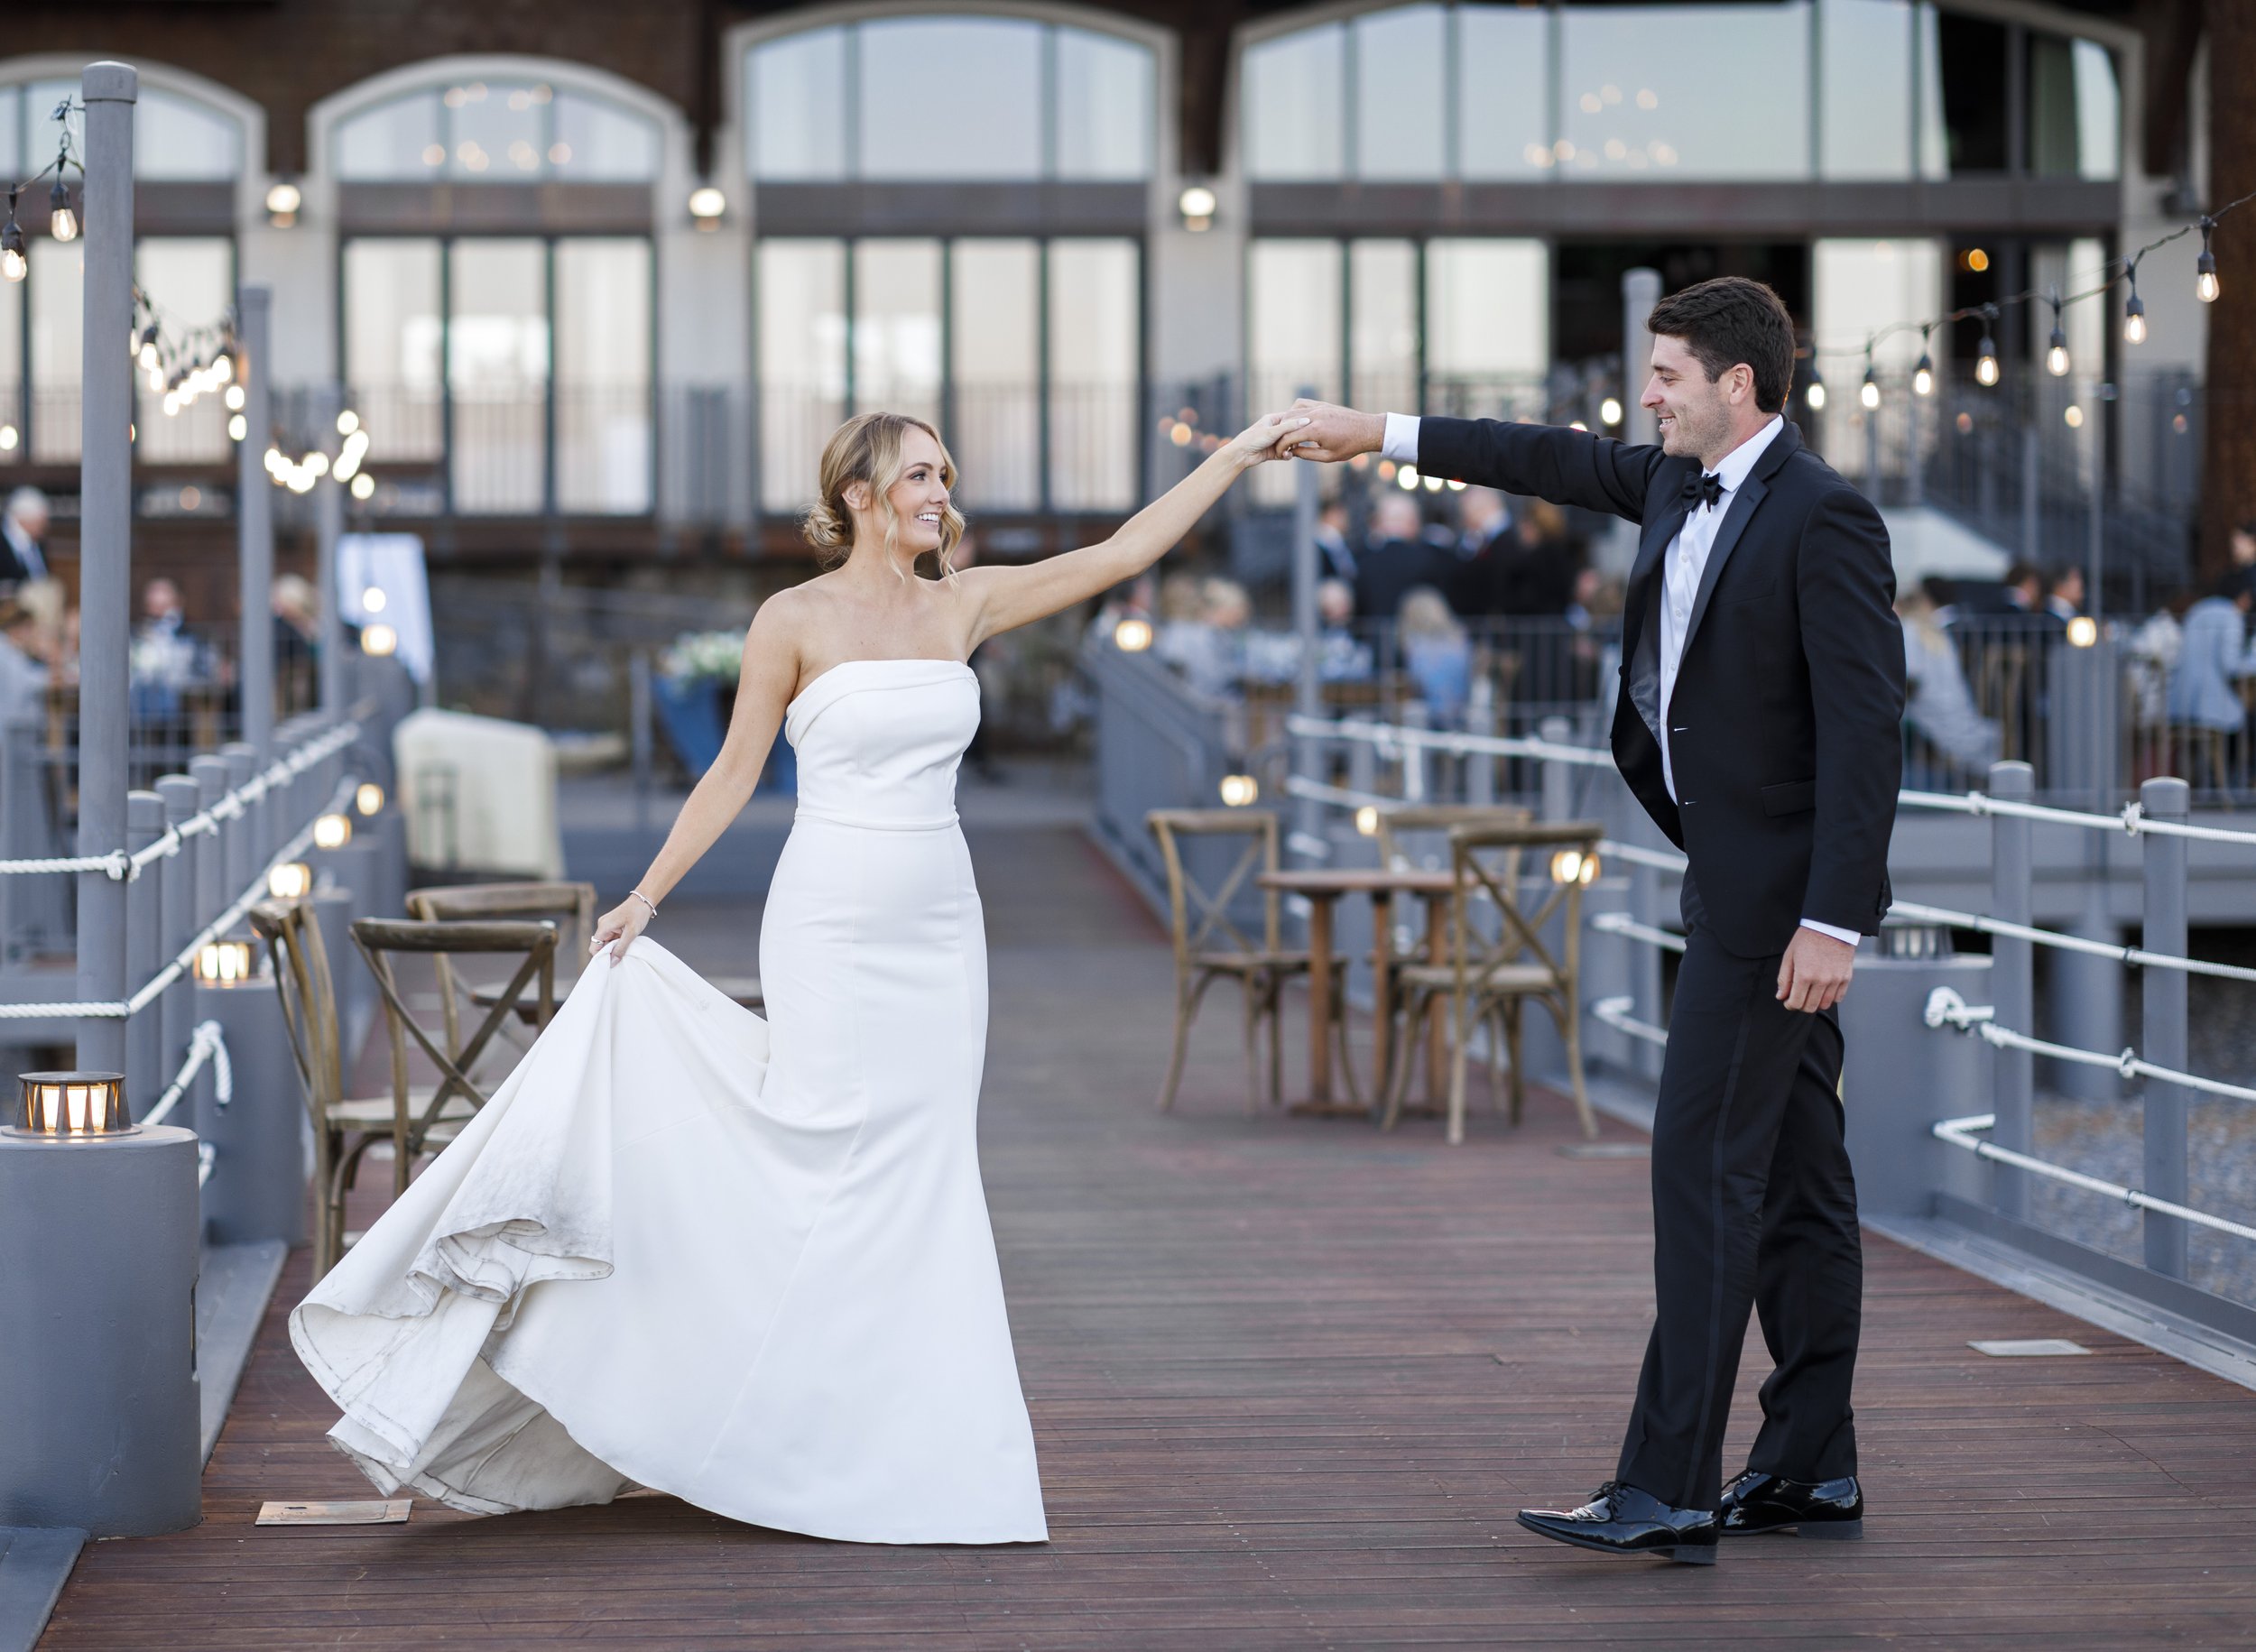  A bride and groom dance on a lake pier during a summer wedding captured by Savanna Richardson Photography. newlyweds dancing on a pier #savannarichardsonphotography #tahoewedding #lakesidewedding #outdoorwedding #summerwedding #laketahoe 